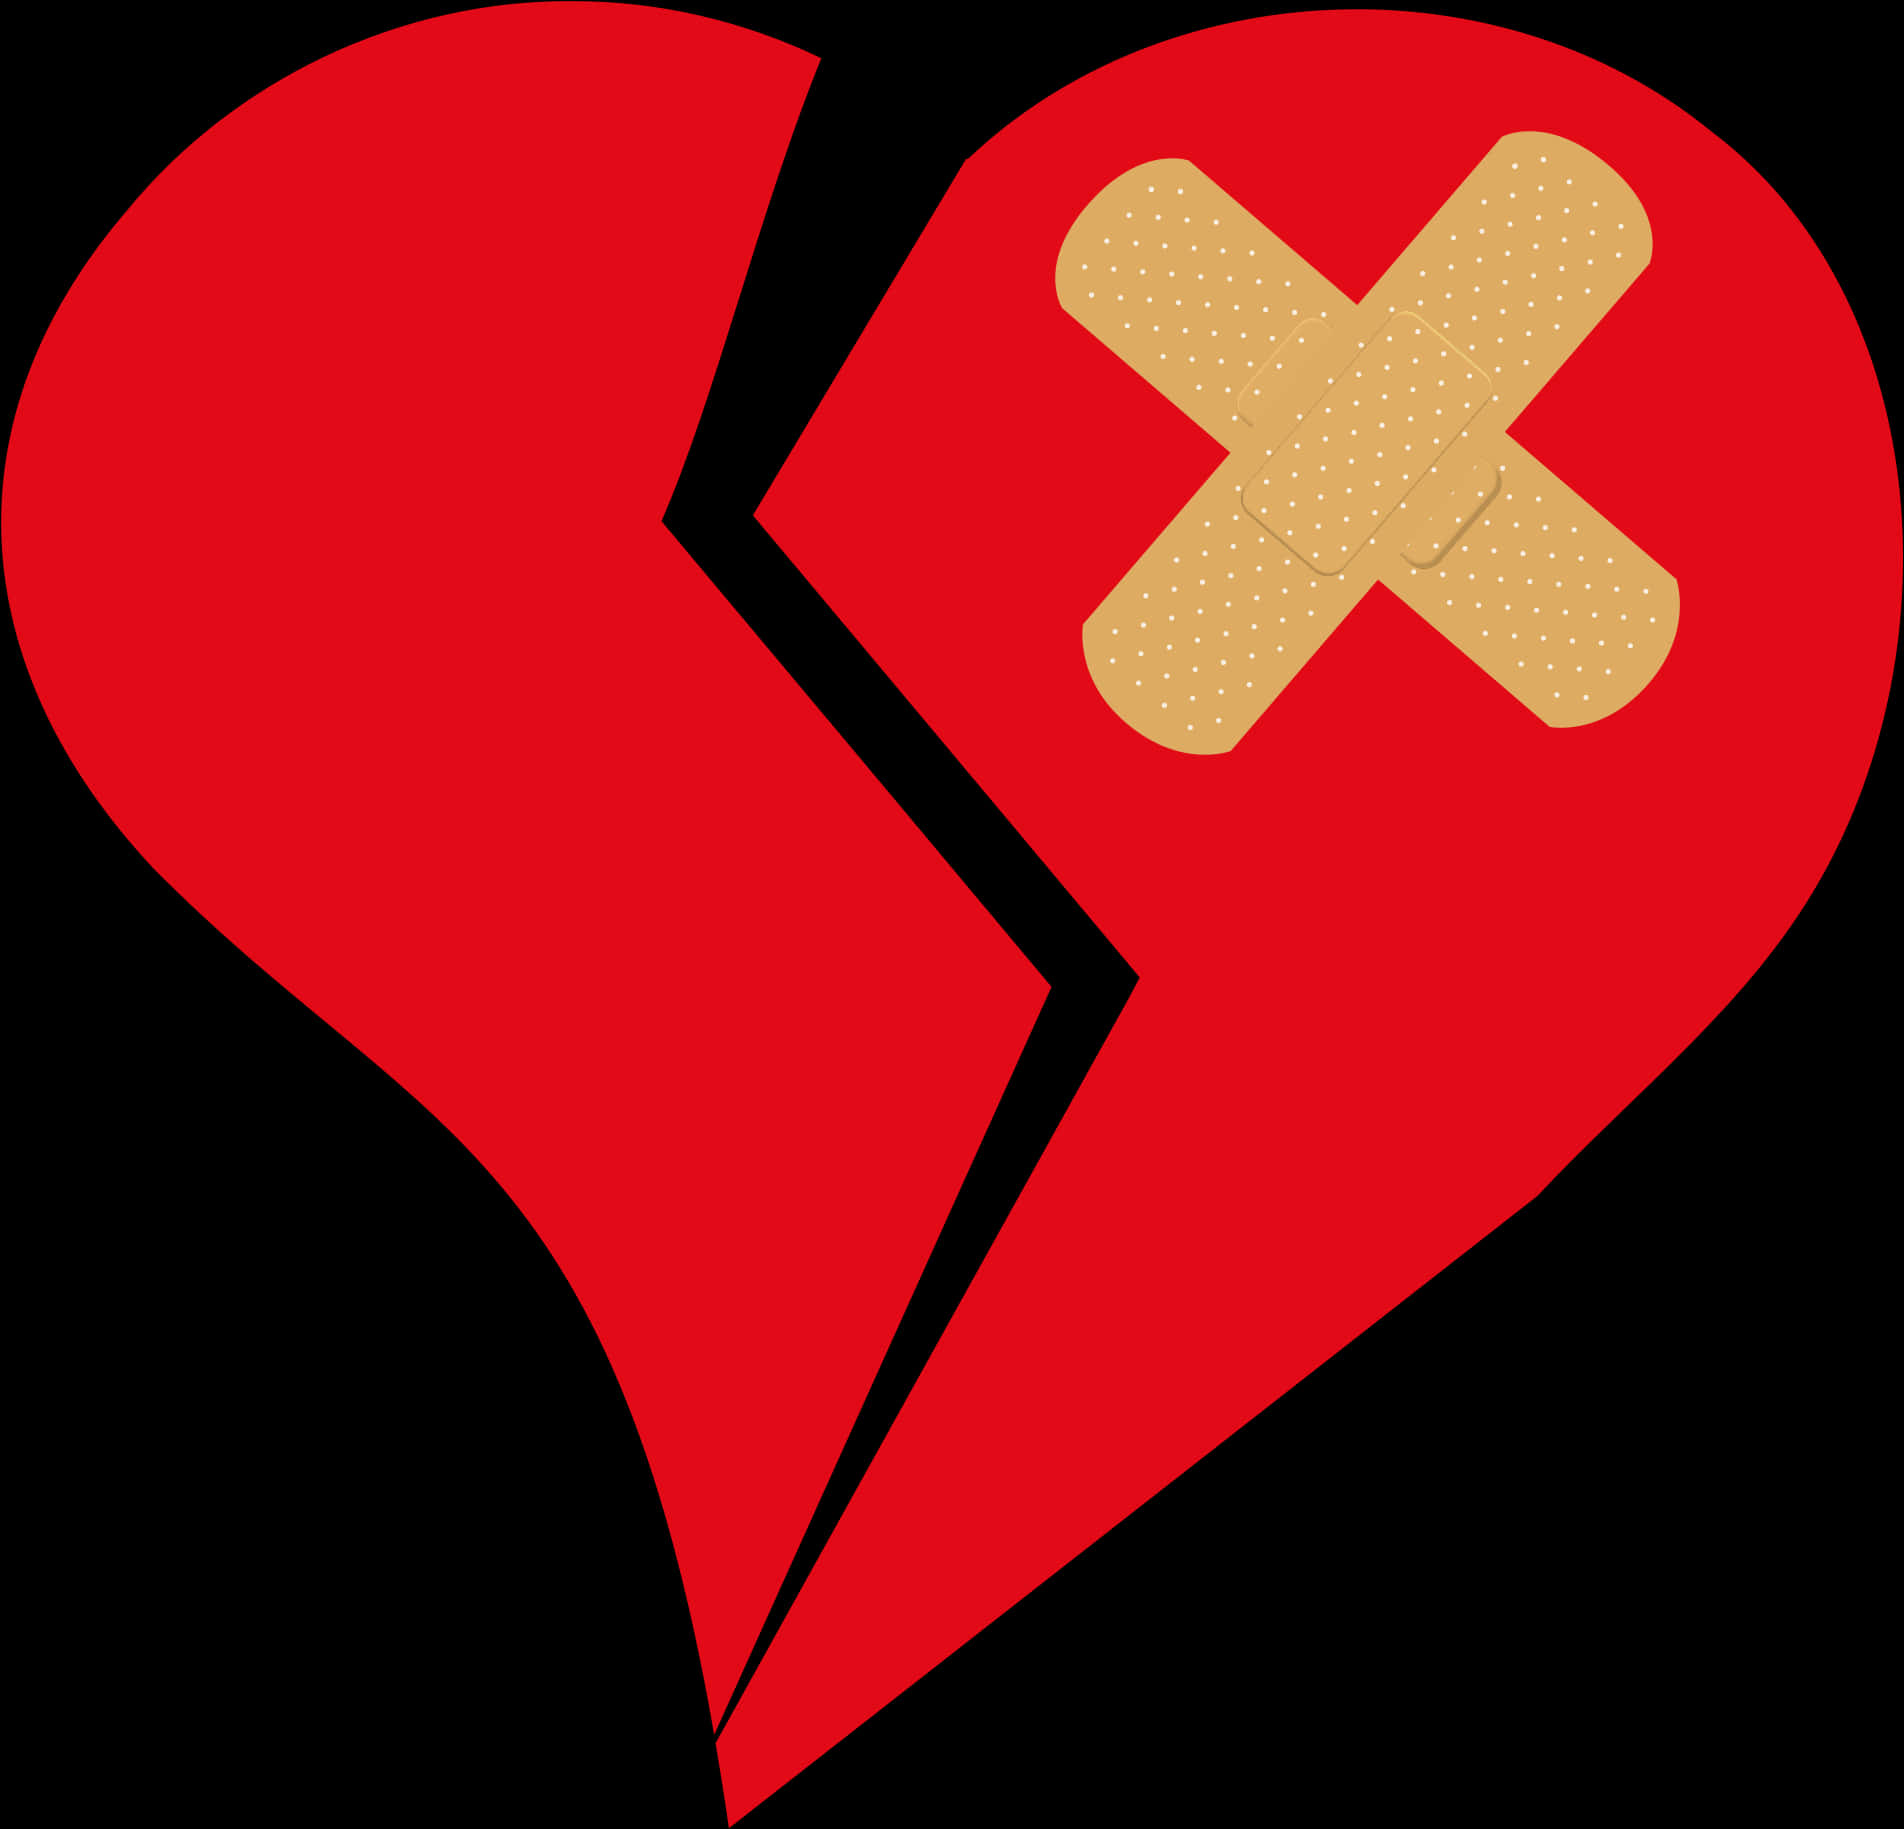 A Broken Heart With A Bandage On It PNG